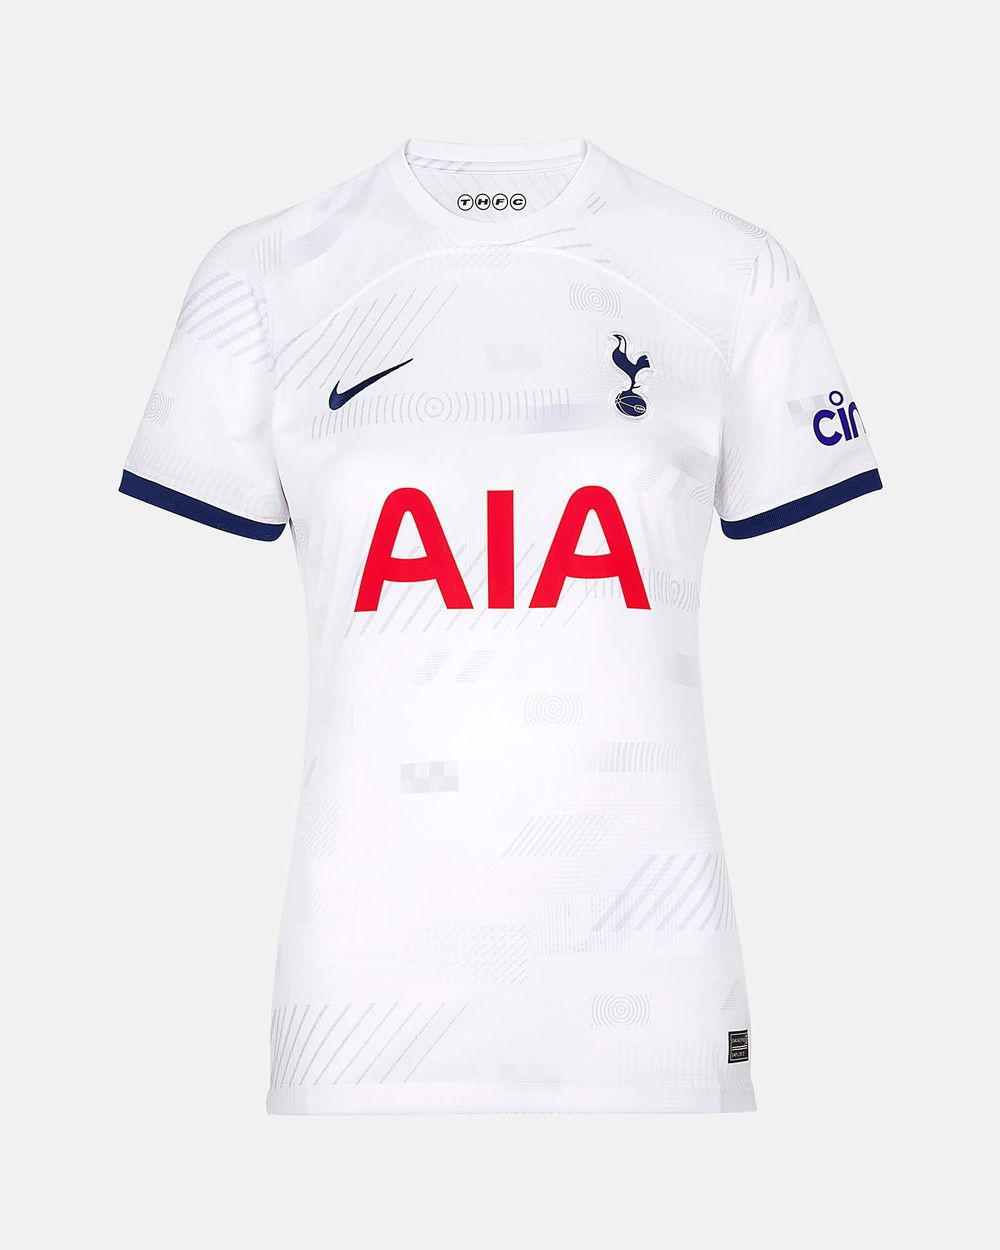 The new home kit, a white shirt with subtle geometric print and navy sleeve detail.